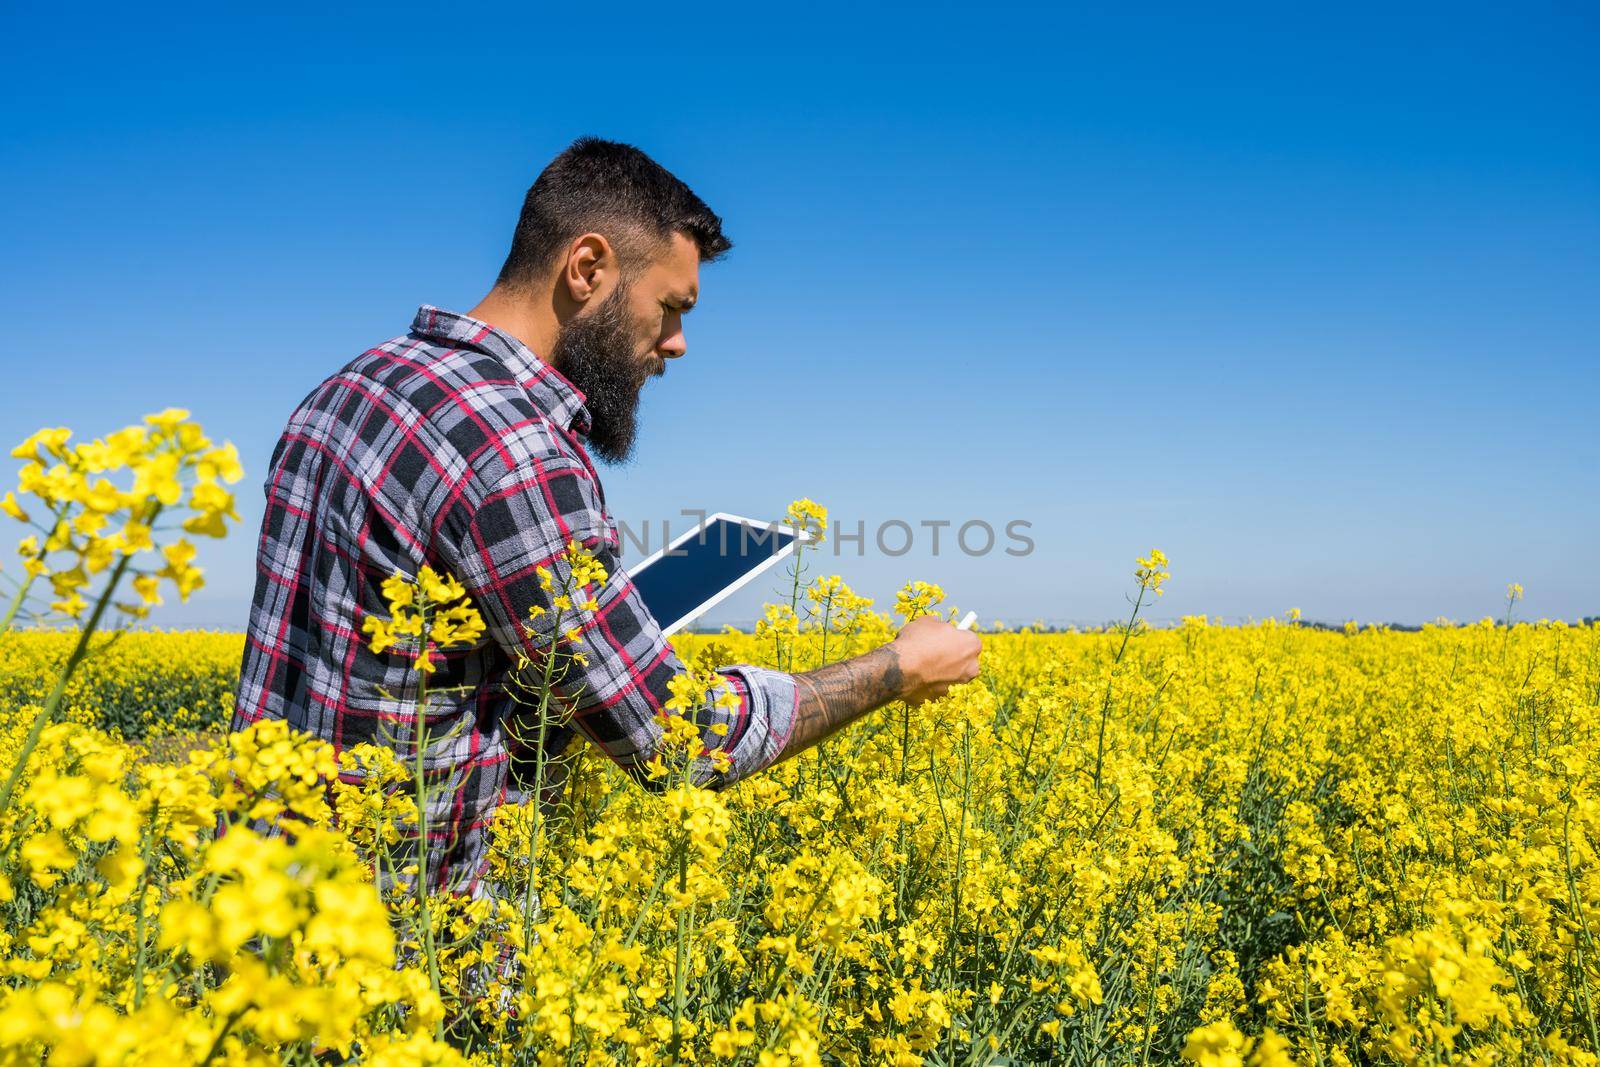 Agronomist is standing in his blooming rapeseed field and examining the progress of crops.